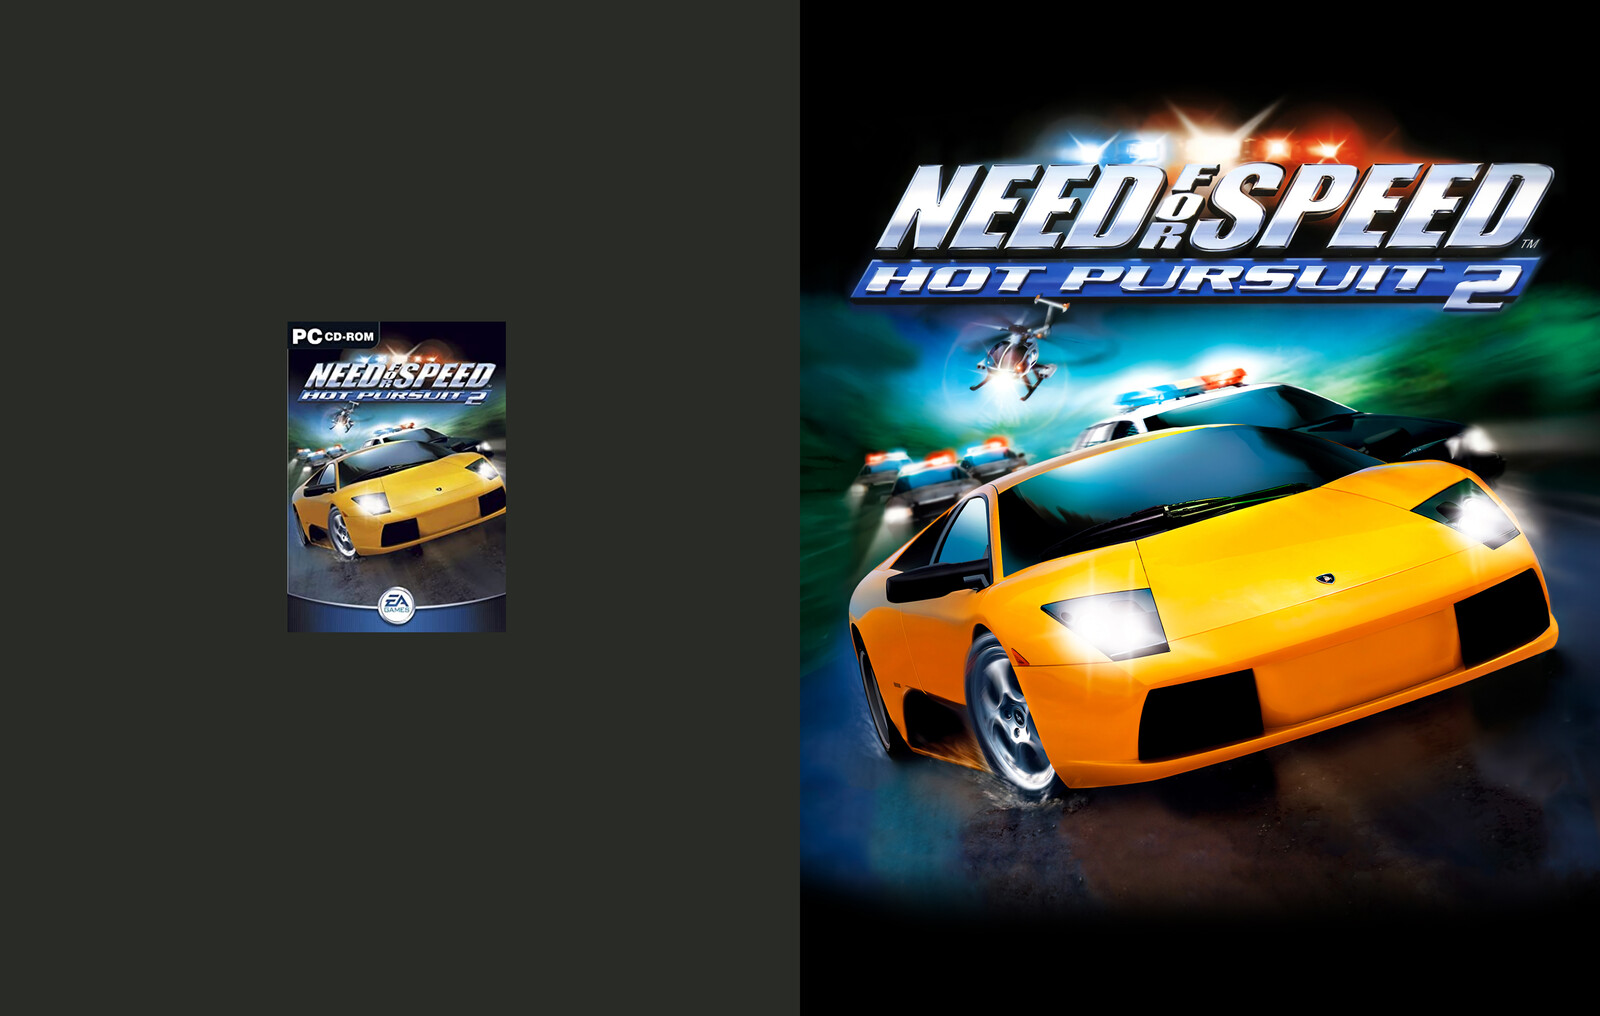 Need for Speed: Hot Pursuit 2 (Original Scan vs. Poster format)